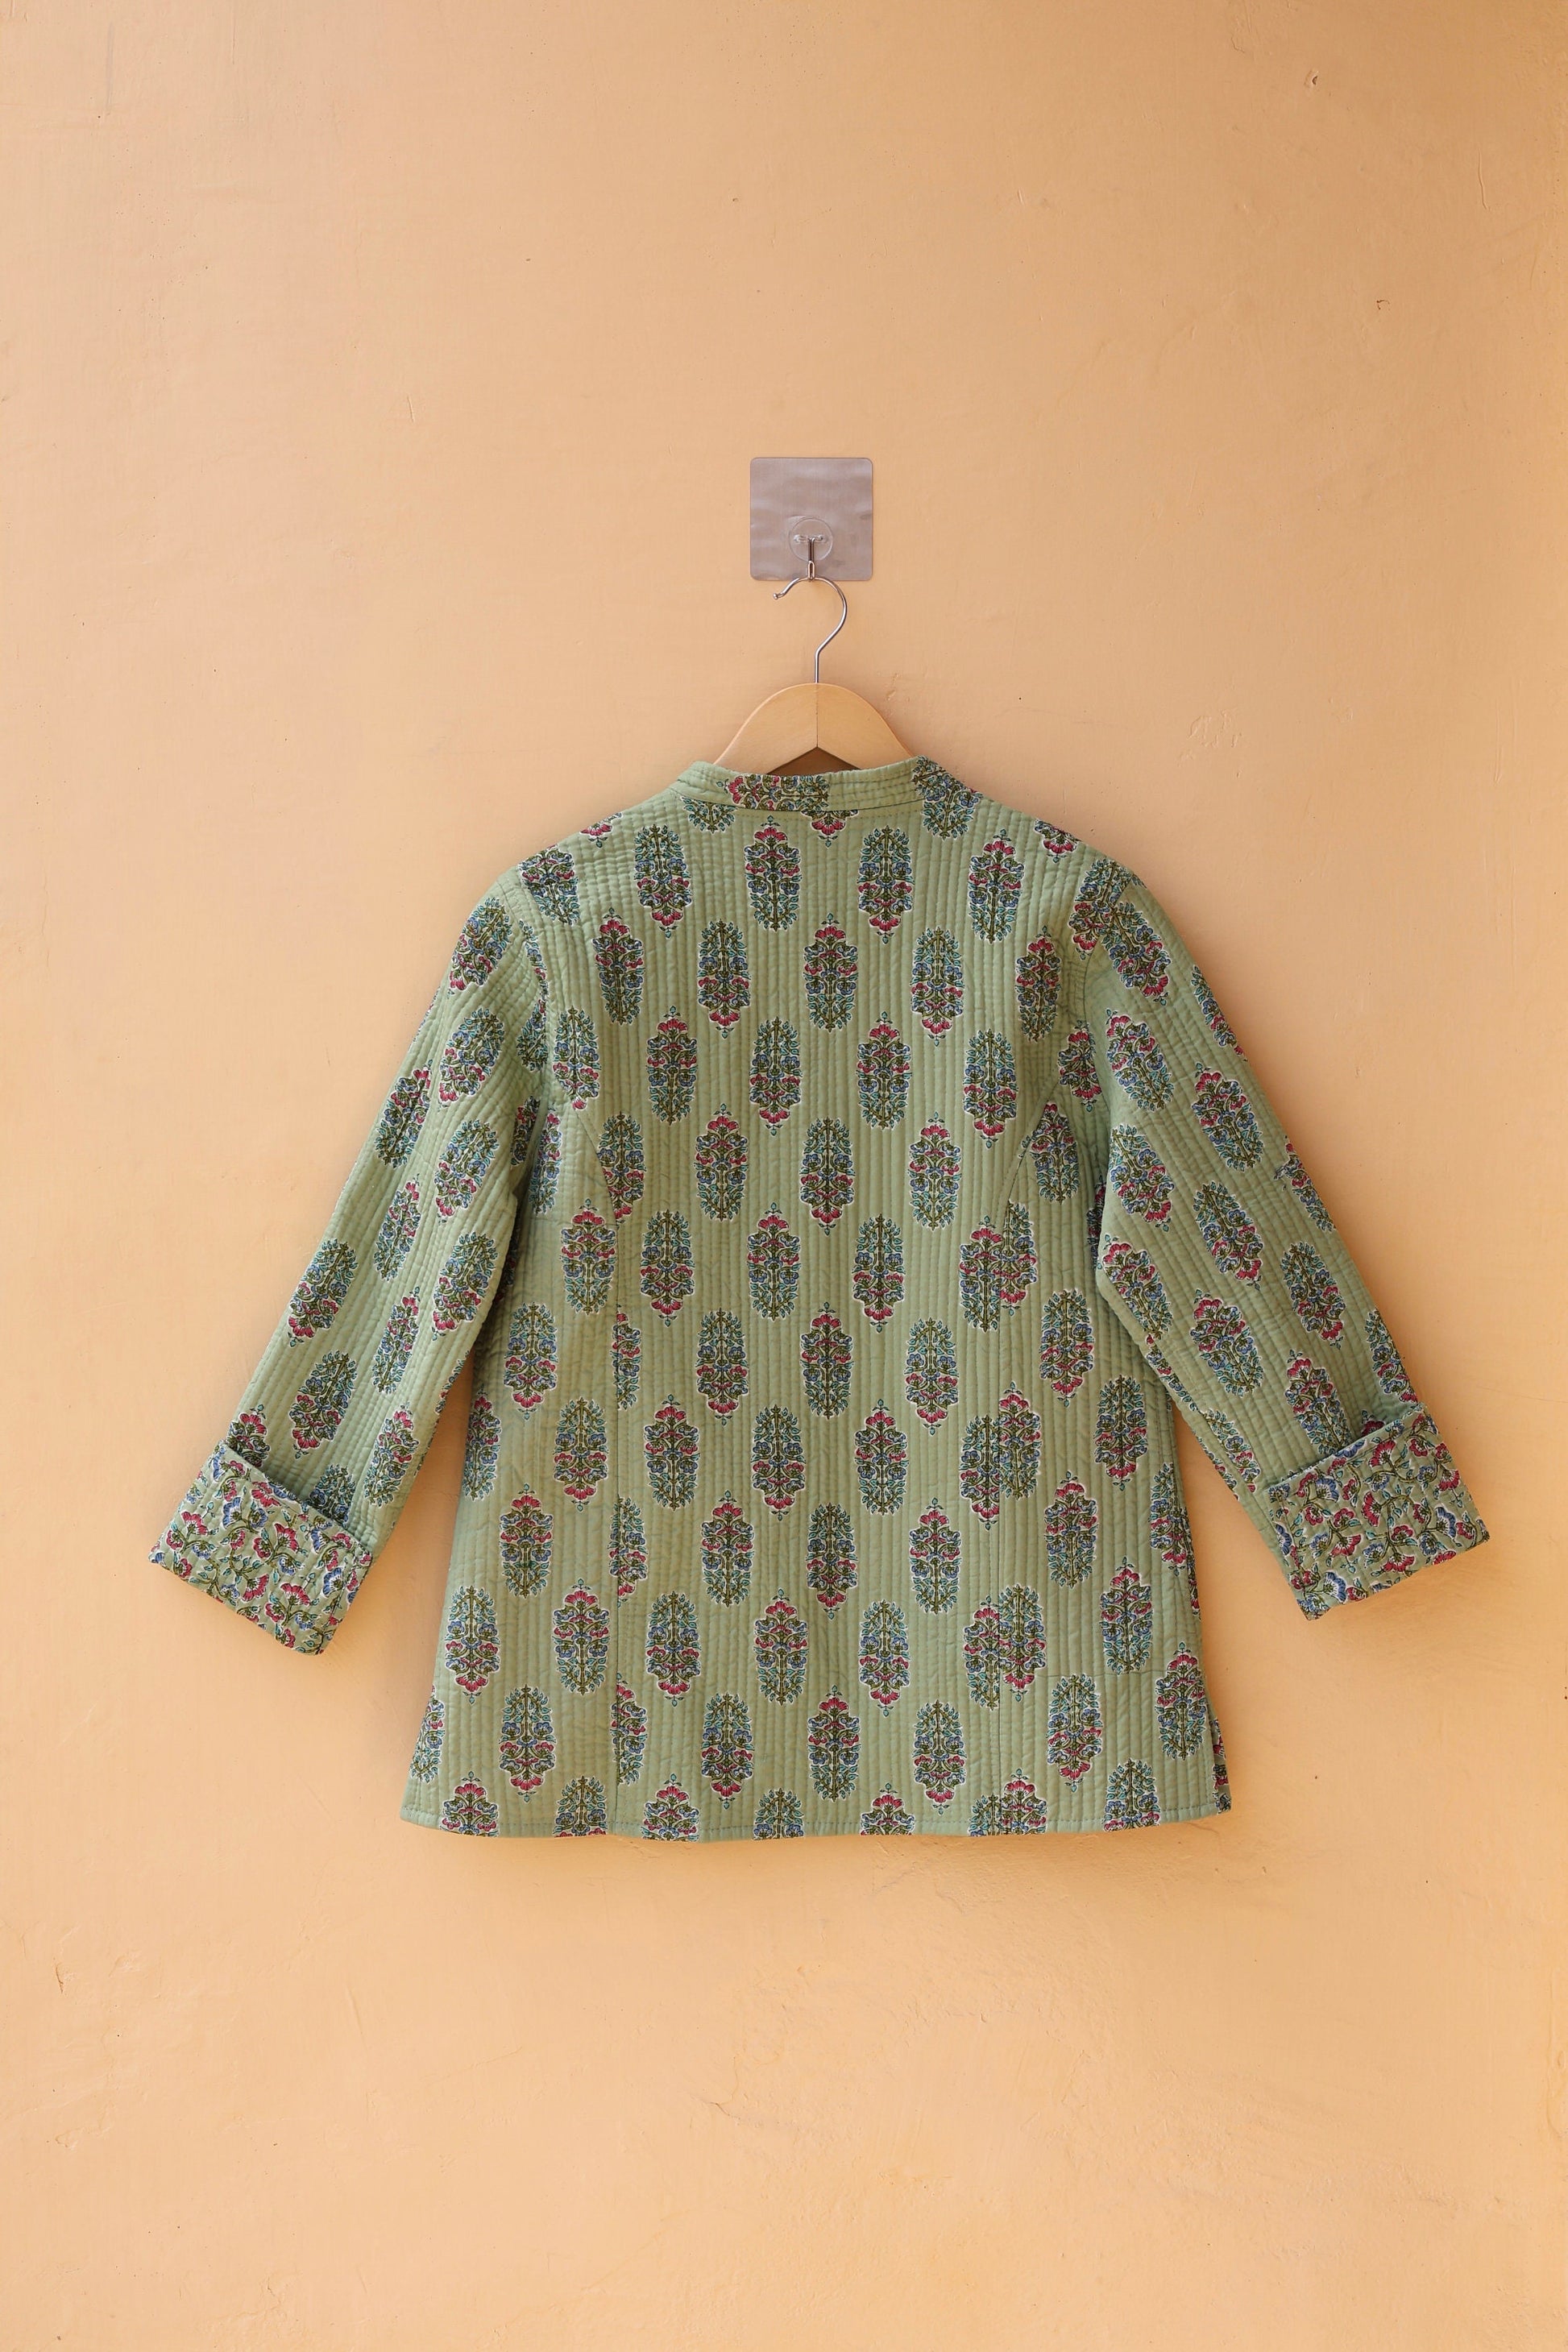 Indian Handmade Quilted Cotton Kantha Jacket Stylish Green Floral Women's Coat, Reversible Waistcoat for Her